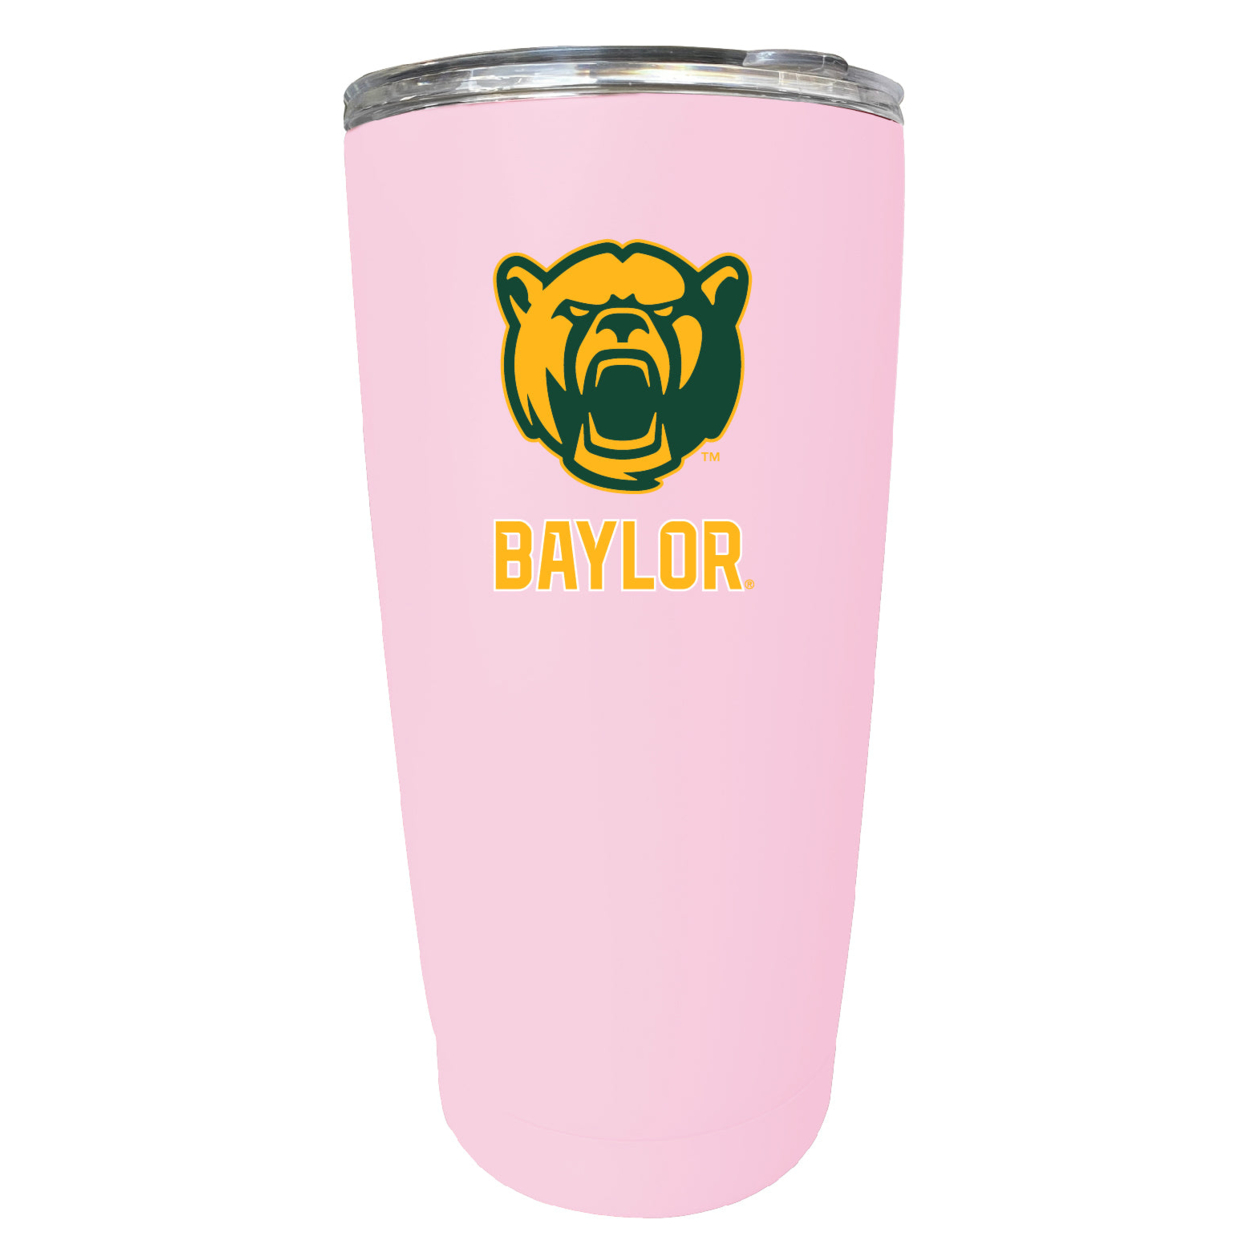 Baylor Bears 16 Oz Stainless Steel Insulated Tumbler - Green